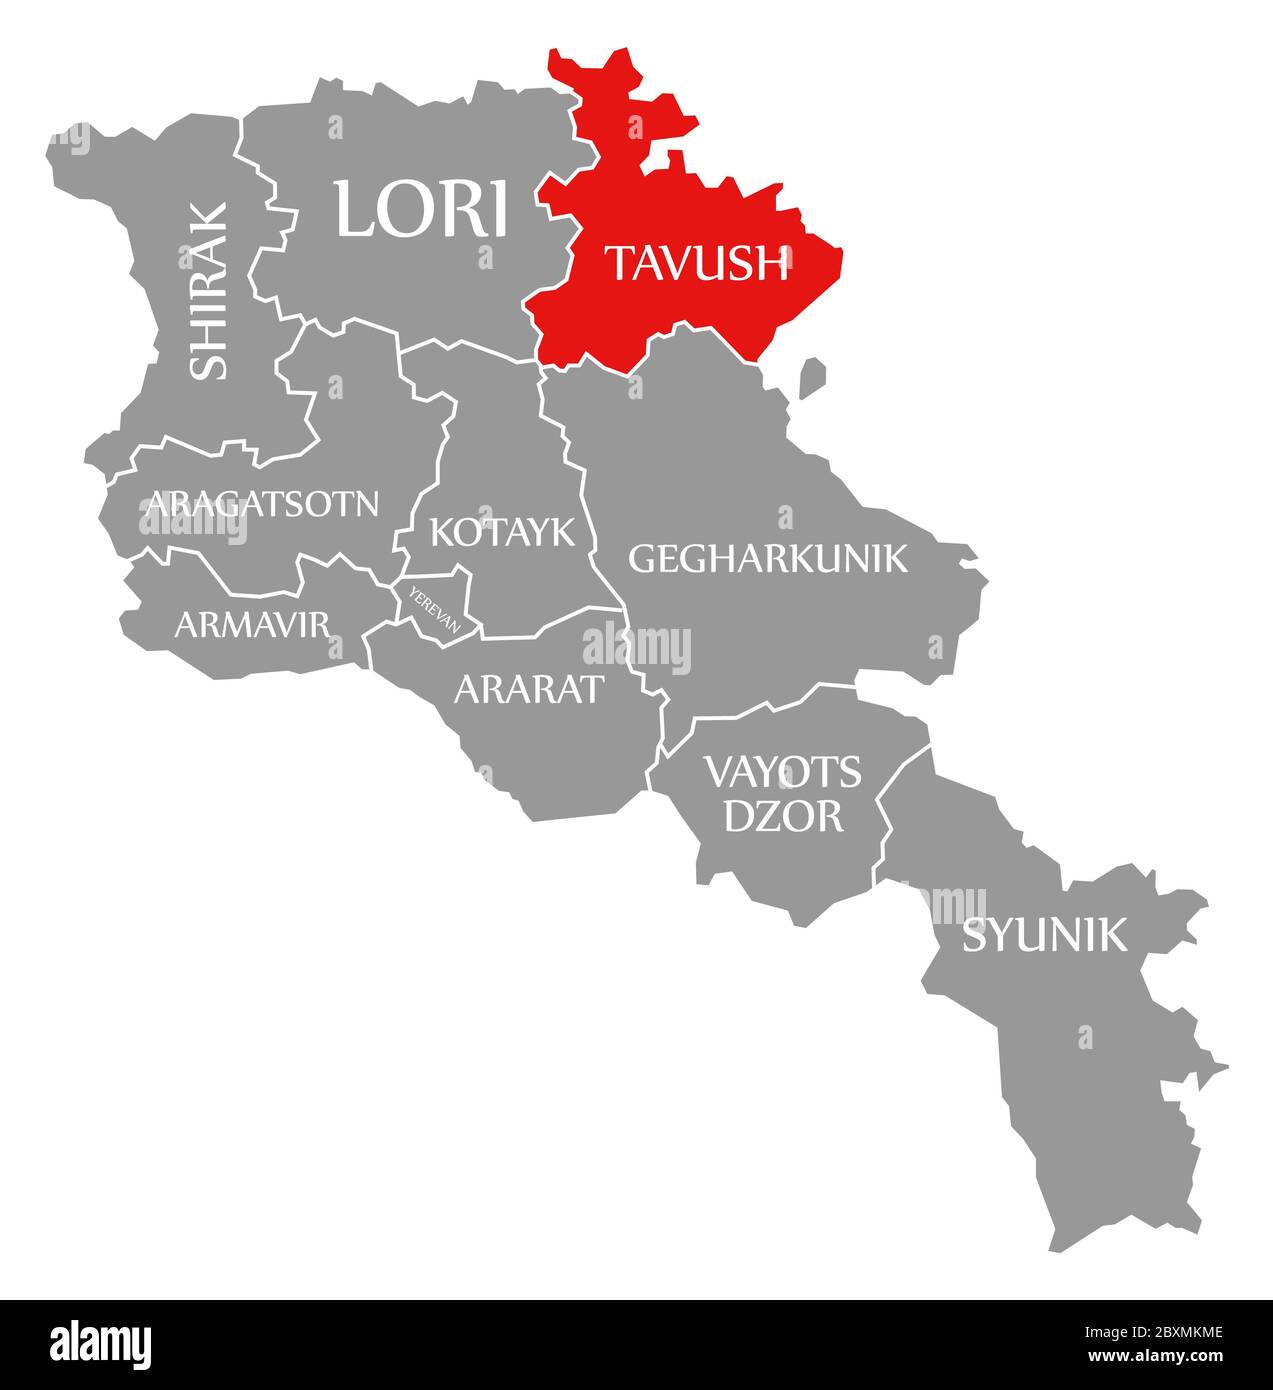 Tavush red highlighted in map of Armenia Stock Photo